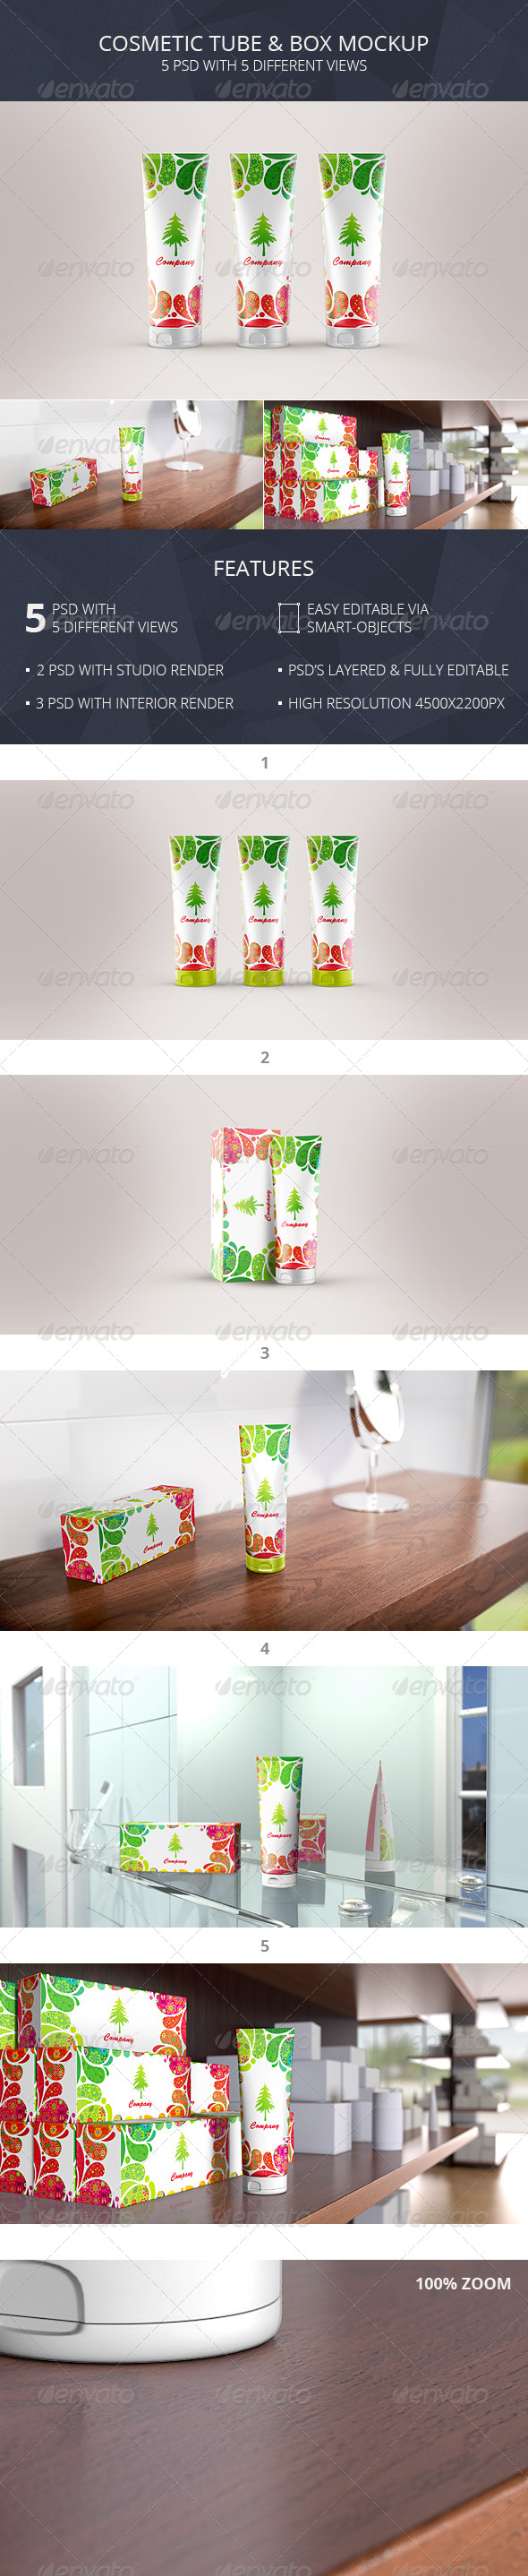 Download Cosmetic Tube & Box Mockup (Toothpaste Packaging) by ...